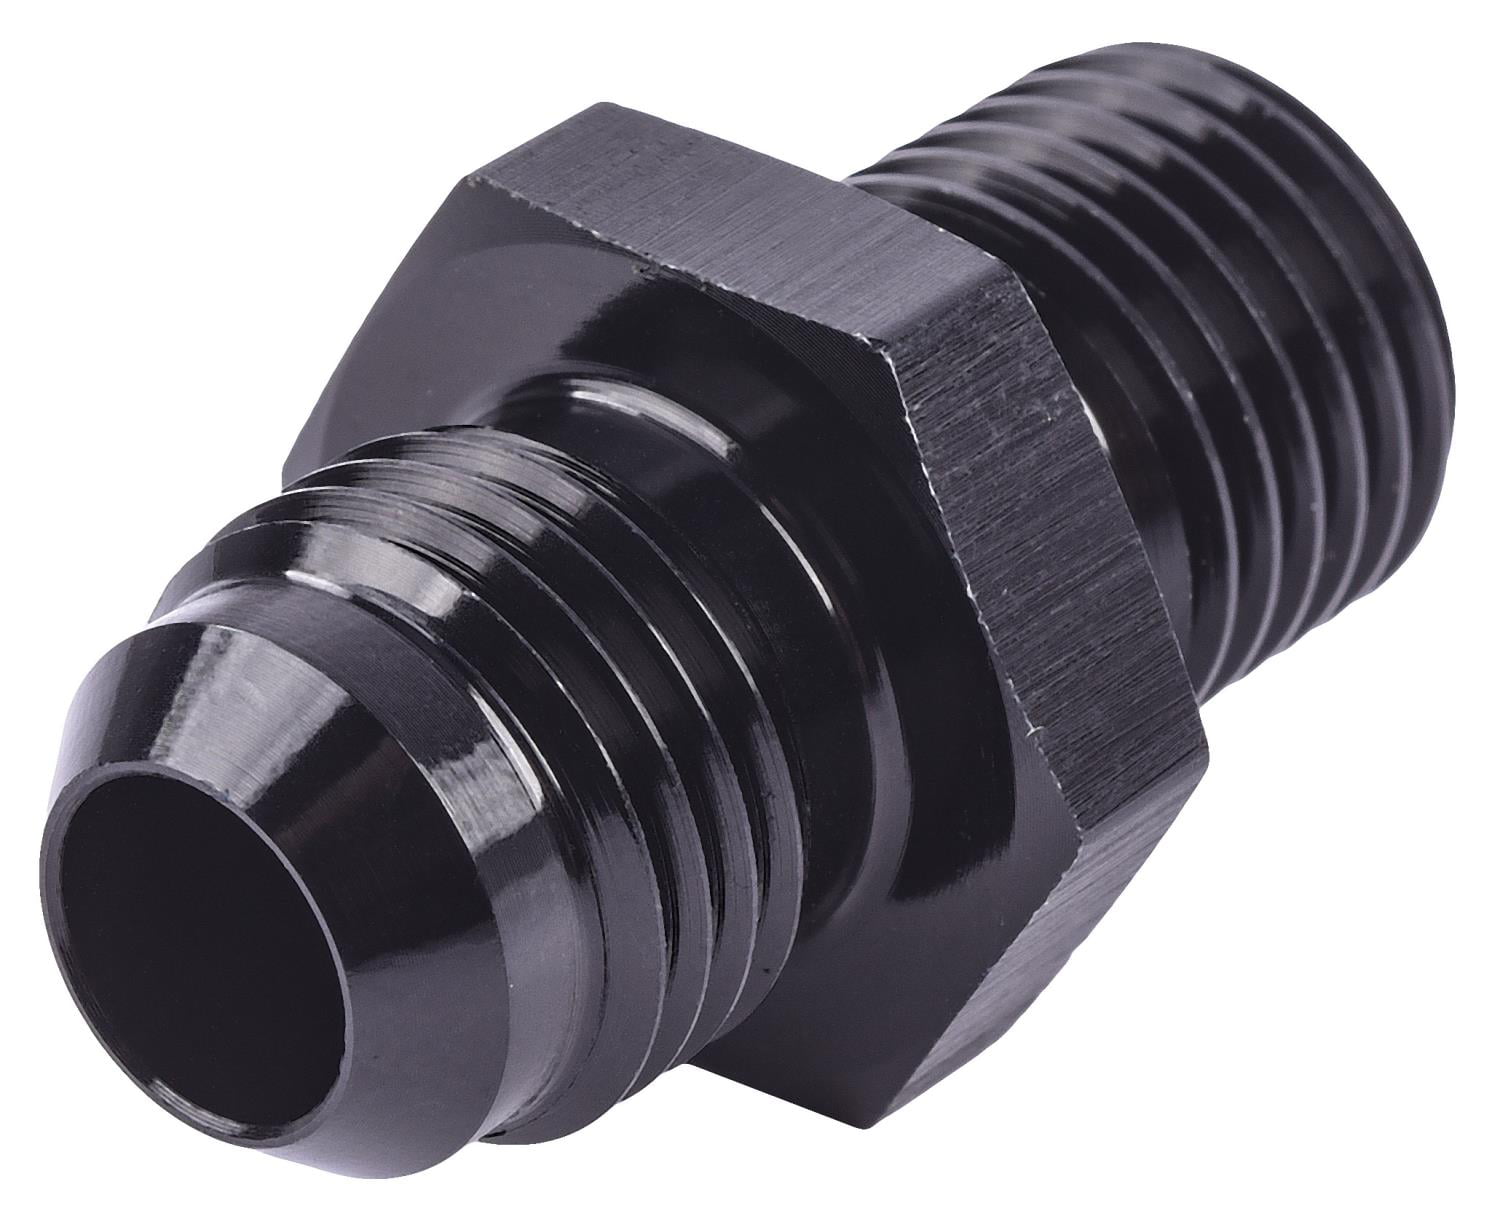 Black Anodized Straight Aluminum Male Flare 10 AN to M18 x 1.5 Male Metric Thread Pipe Fuel Fitting Adapter